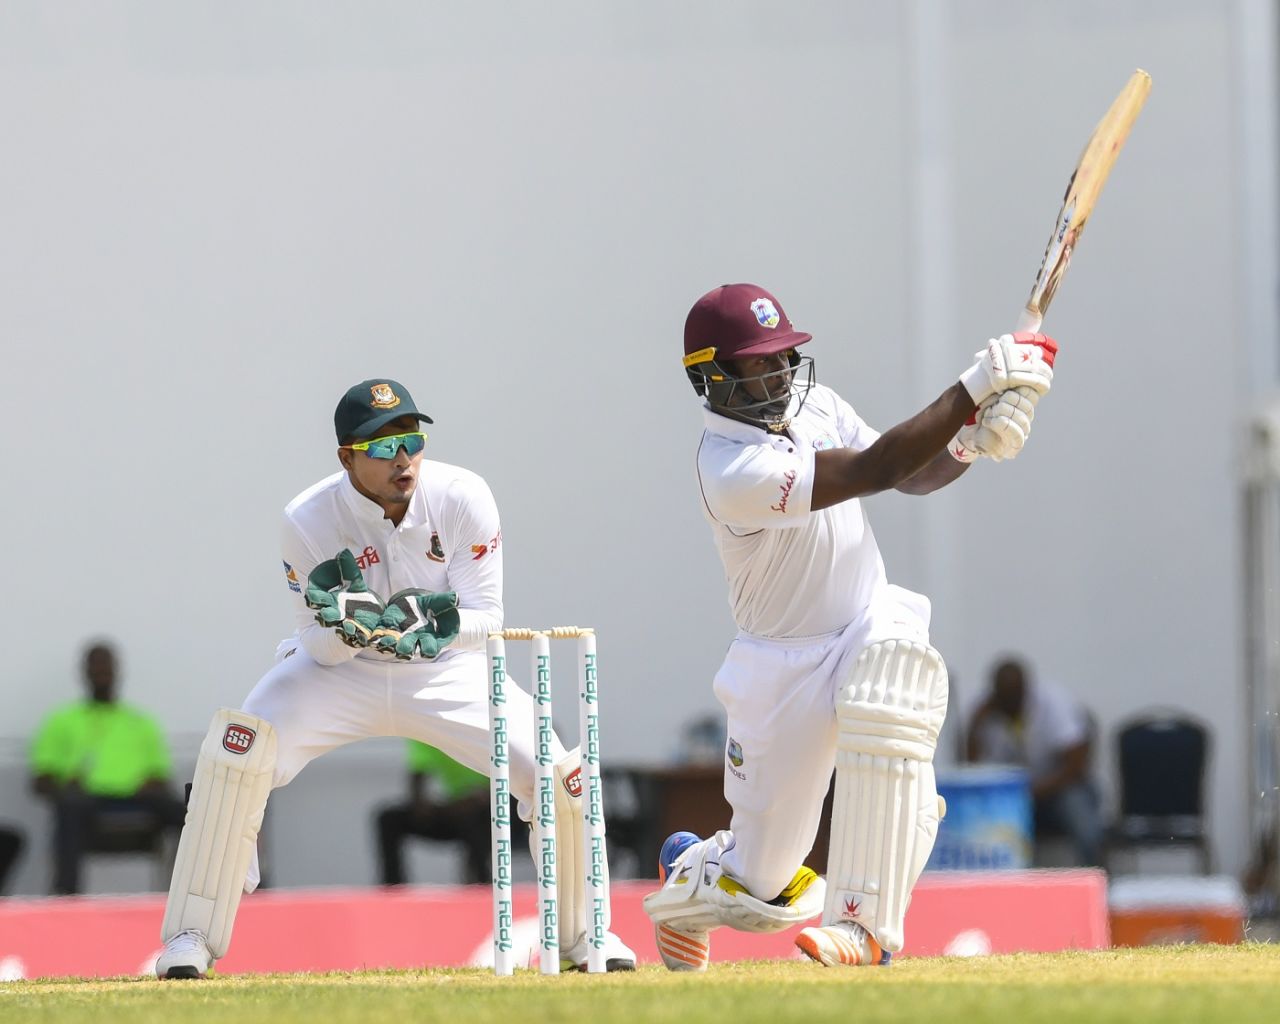 Kemar Roach hits out as Nurul Hasan watches, West Indies v Bangladesh, 1st Test, North Sound, 2nd day, July 5, 2018